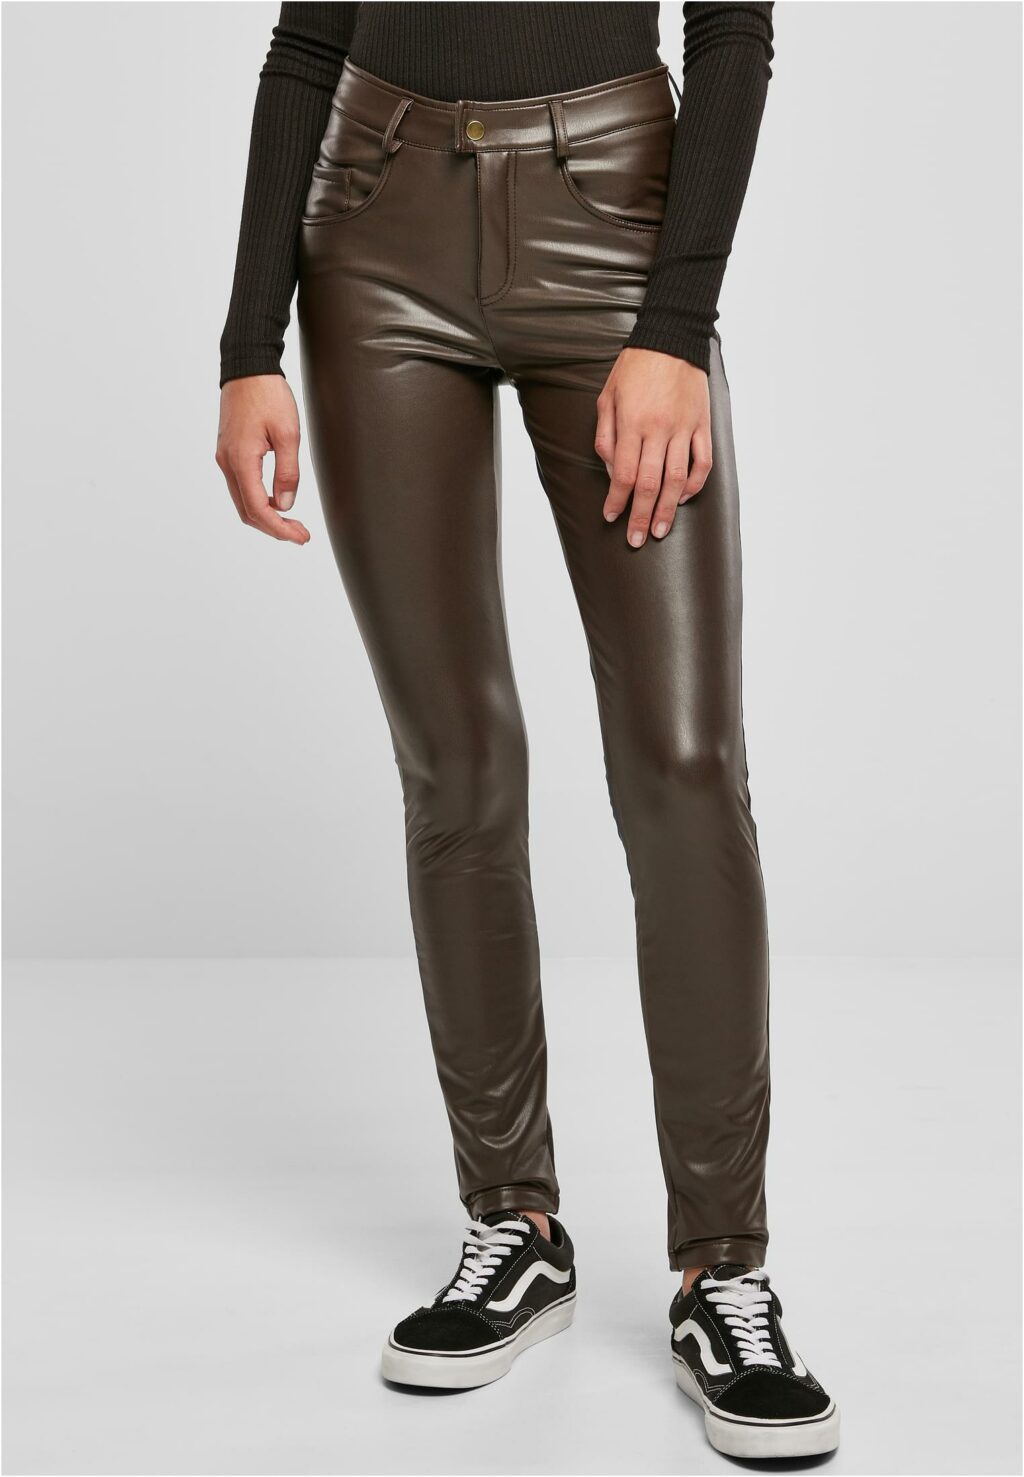 Urban Classics Ladies Mid Waist Synthetic Leather Pants brown TB5455